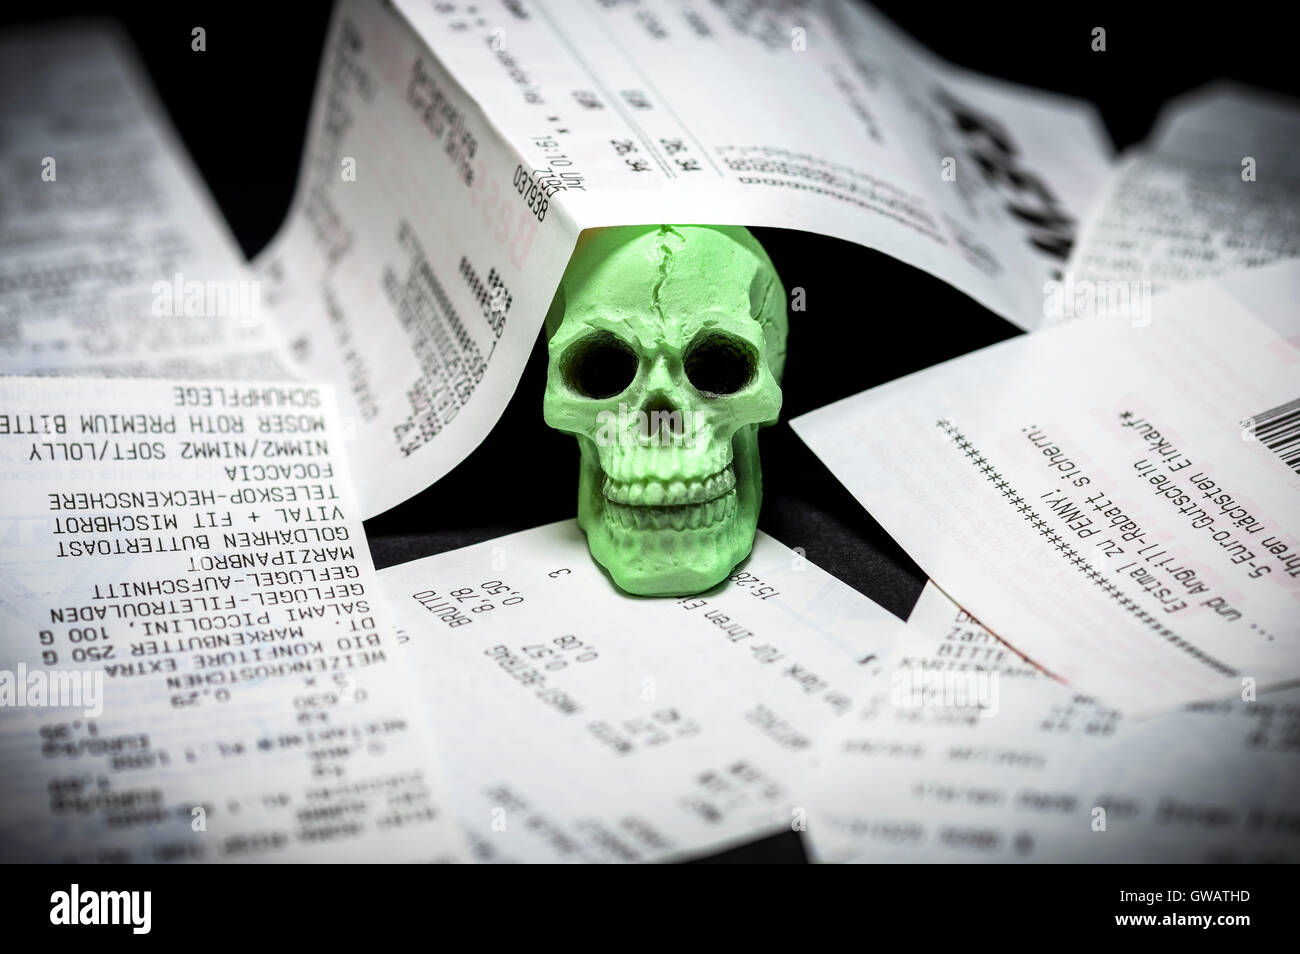 Receipts and death's-head, injurious Bisphenol A in thermo paper, Kassenbons und Totenkopf, schaedliches Bisphenol A in Thermopa Stock Photo